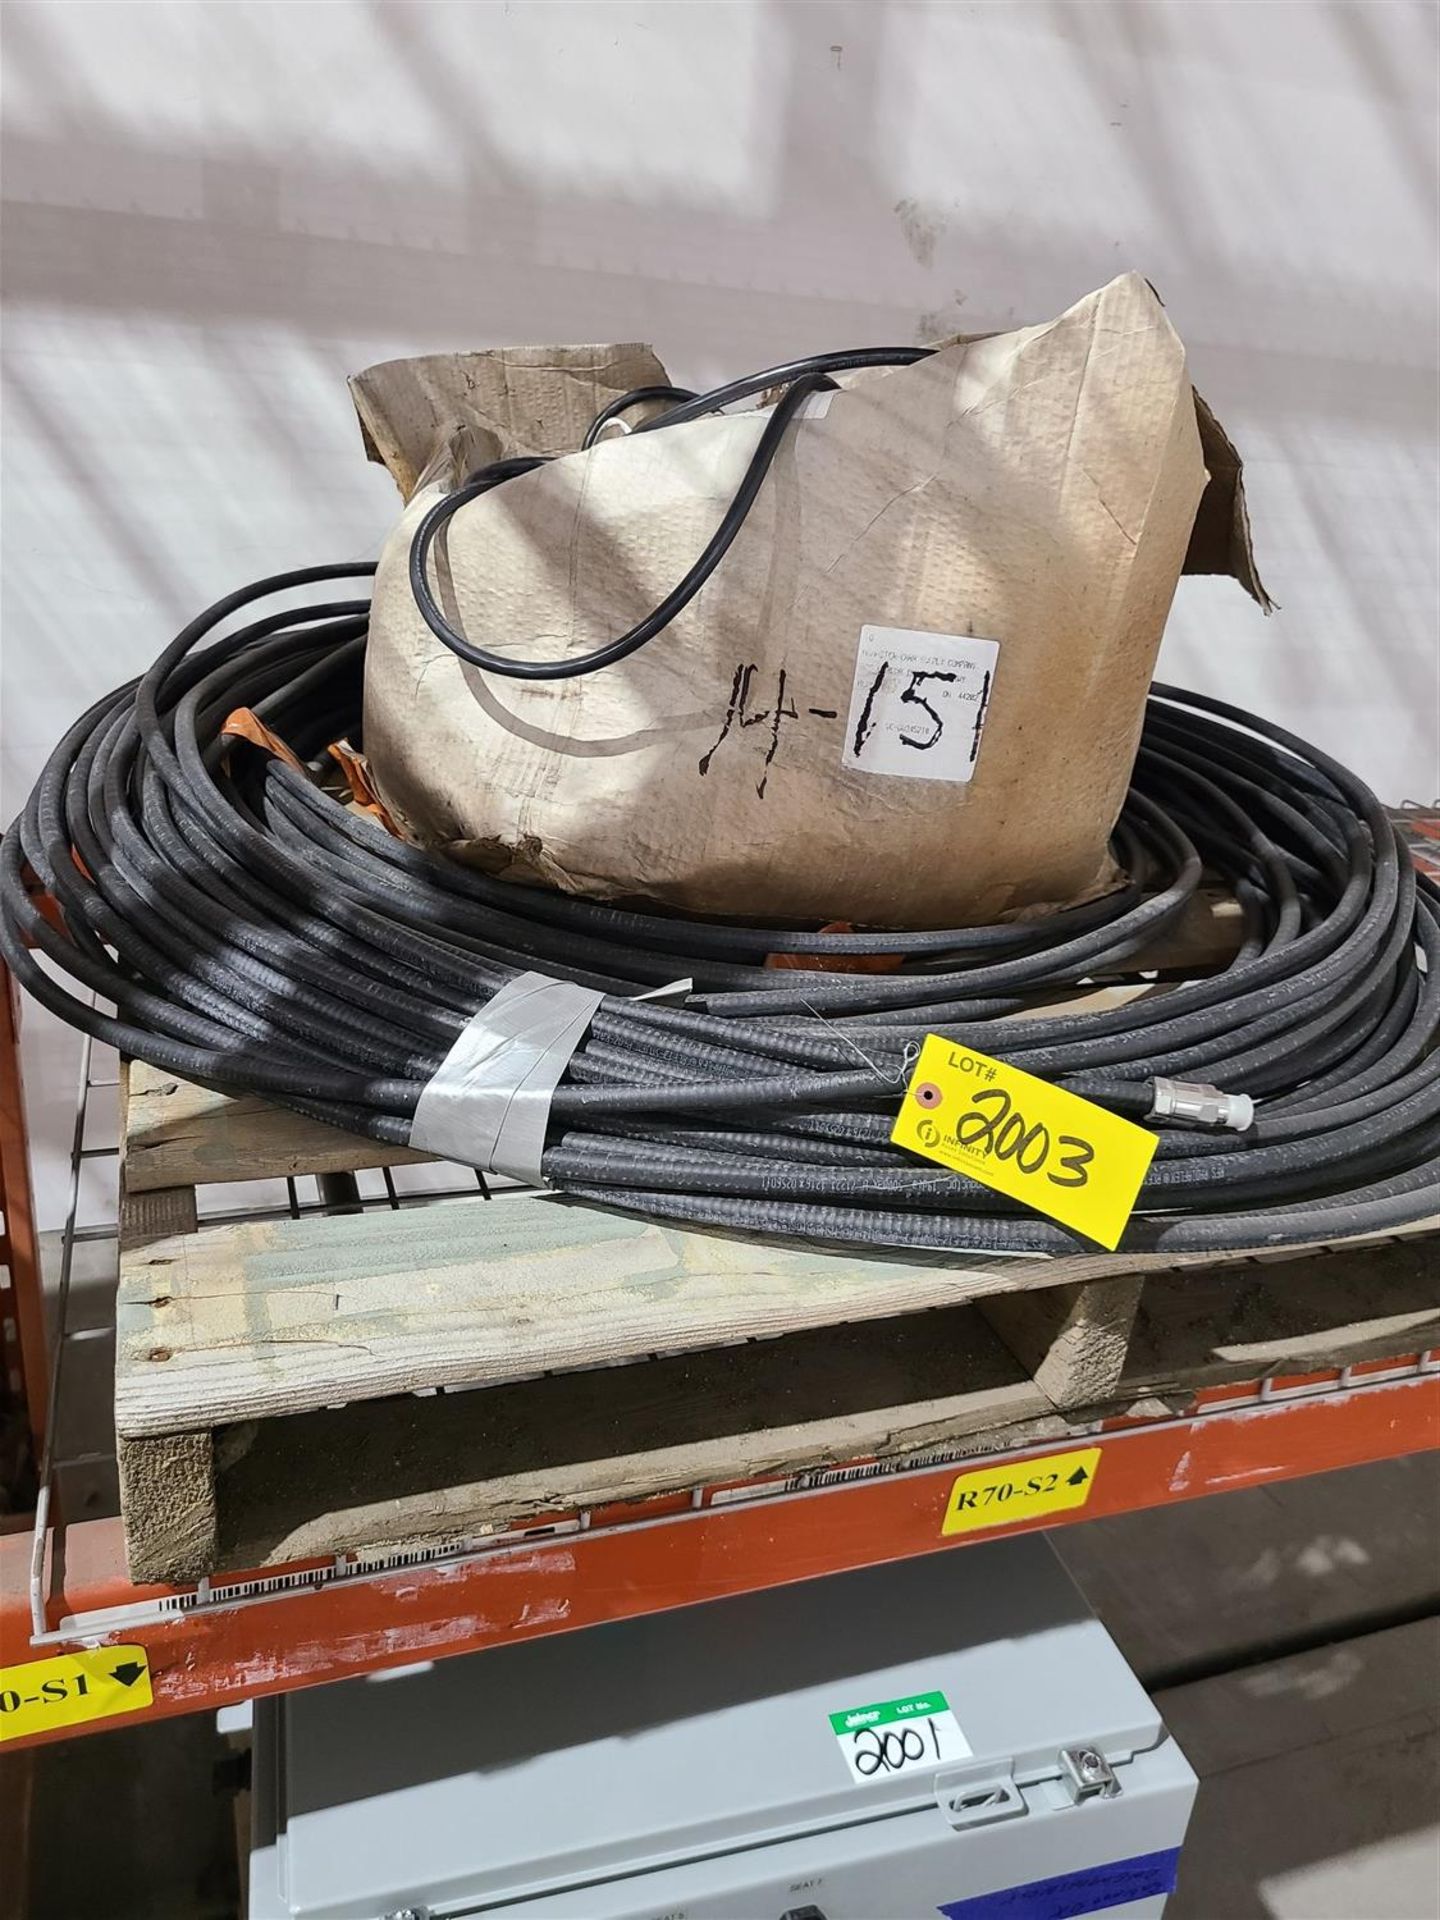 3 PALLETS OF 2 ELECTRICAL BOXES WIRE ETC. - Image 4 of 4